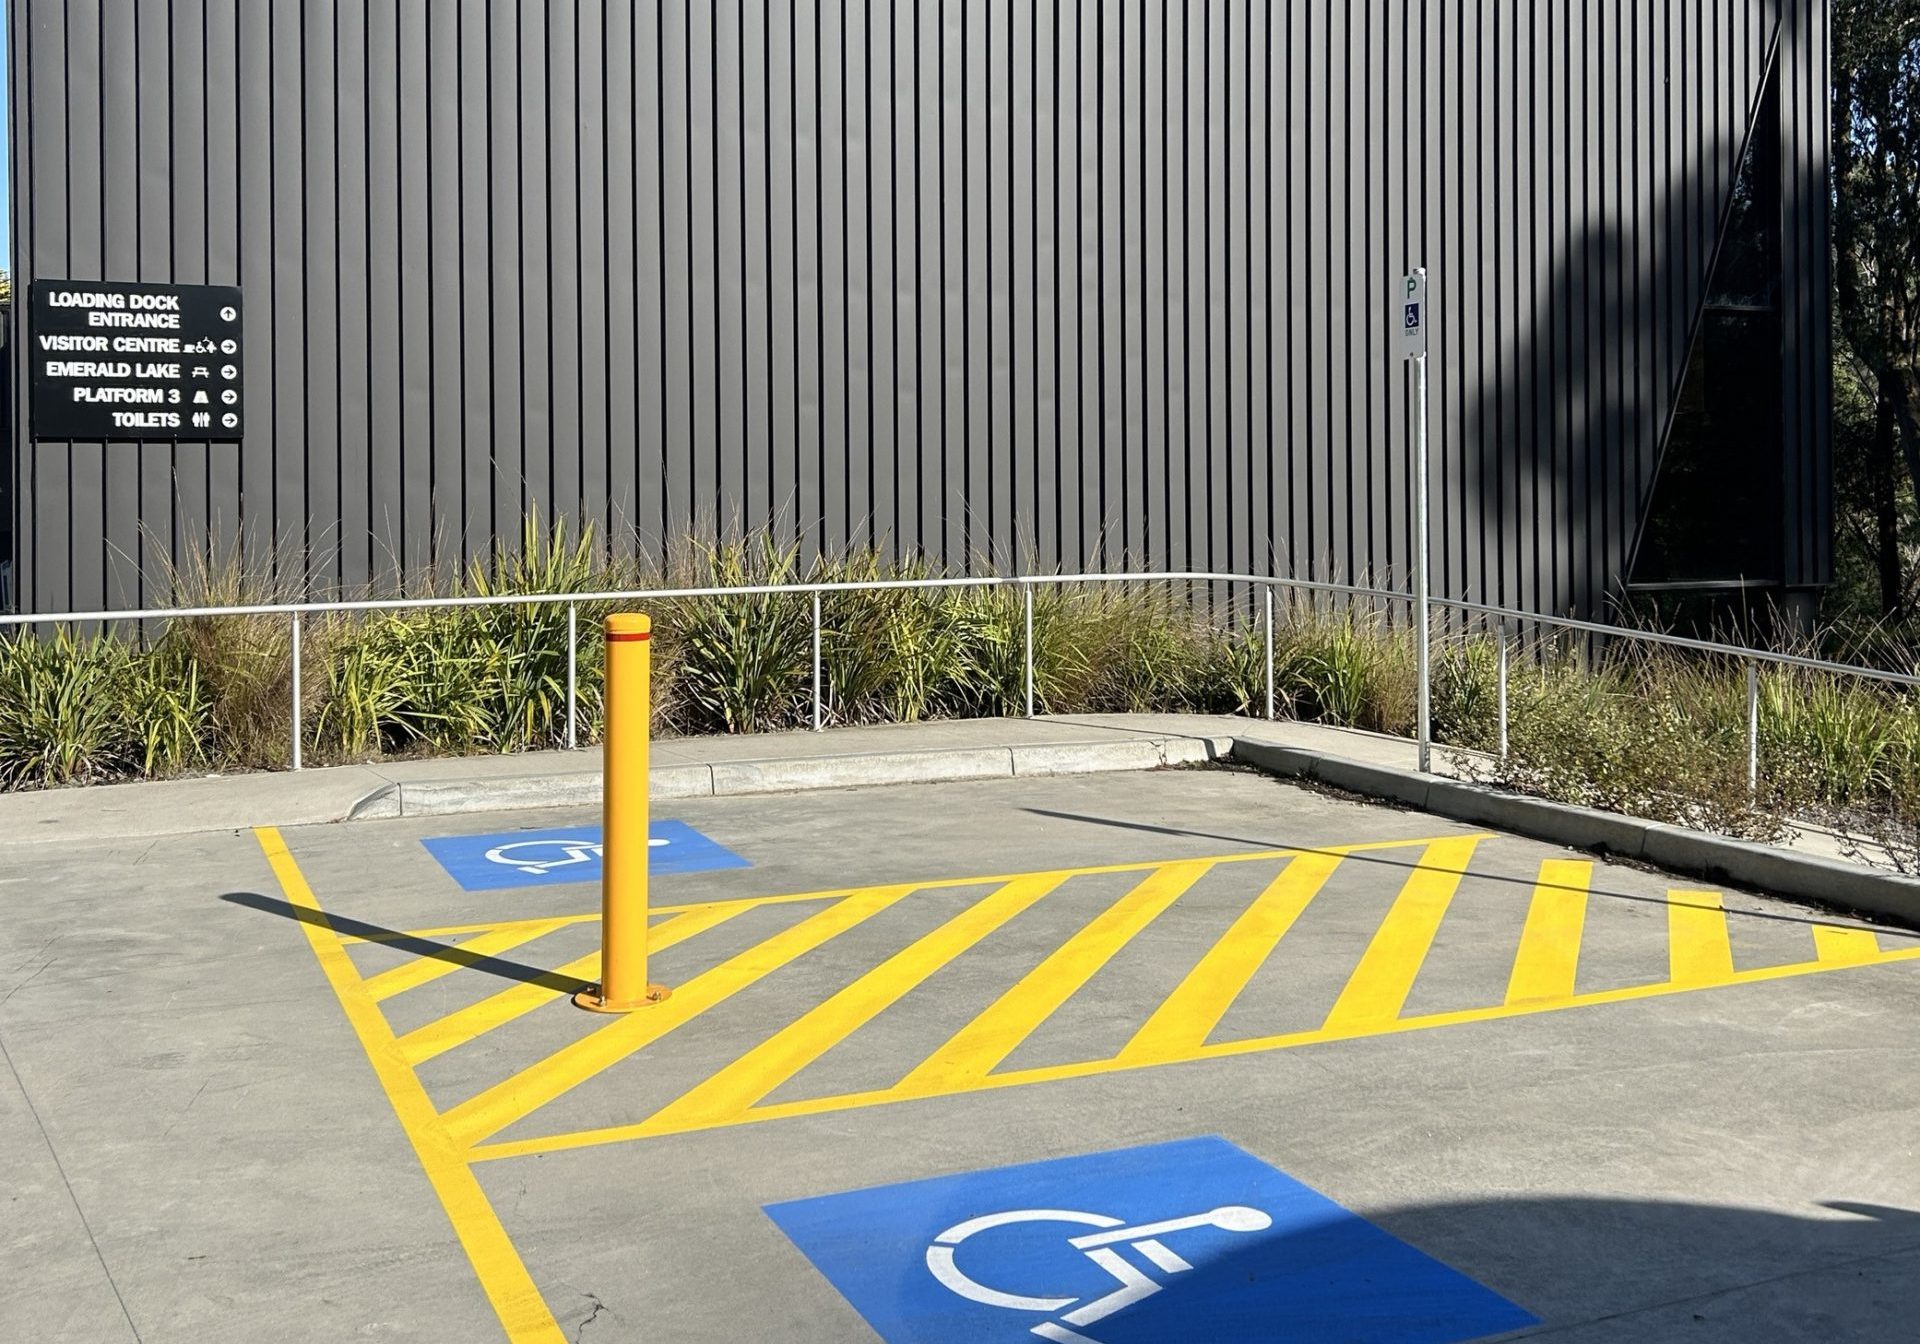 Two accessible car parking spots next to a building with black cladding.